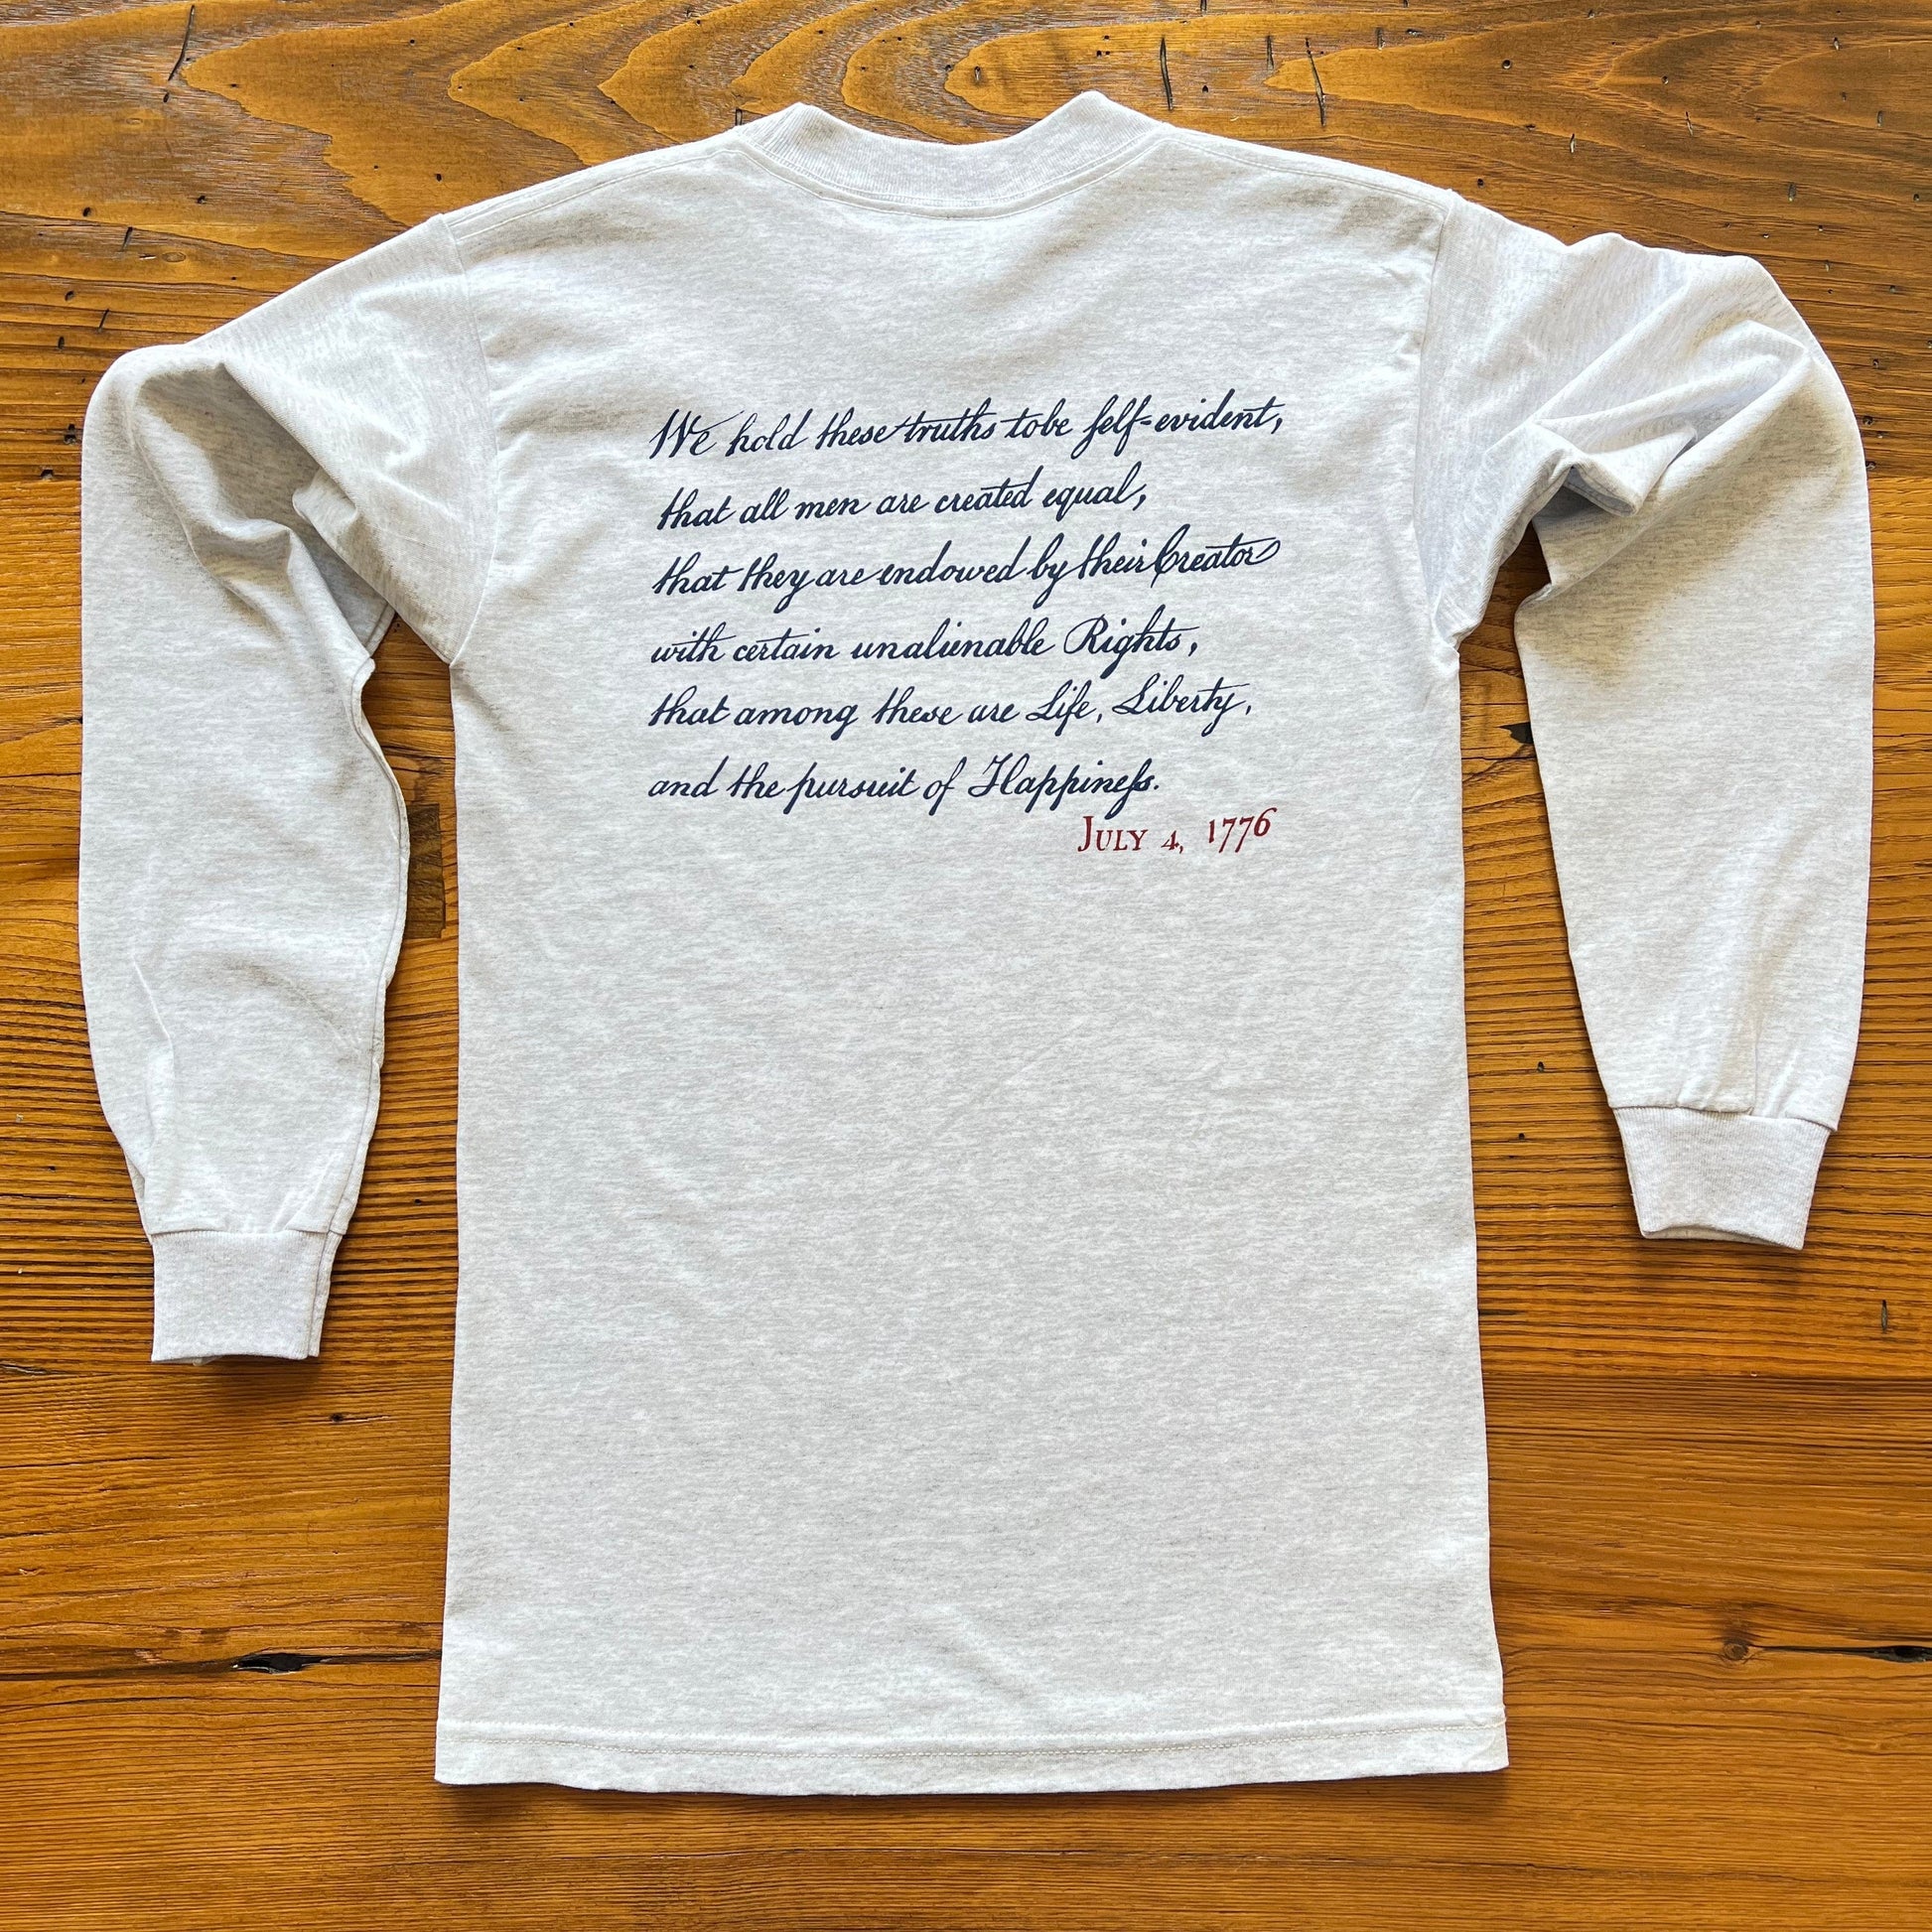 Back of Light Grey "We hold these truths - July 4, 1776” Long-sleeved shirt from the history list store